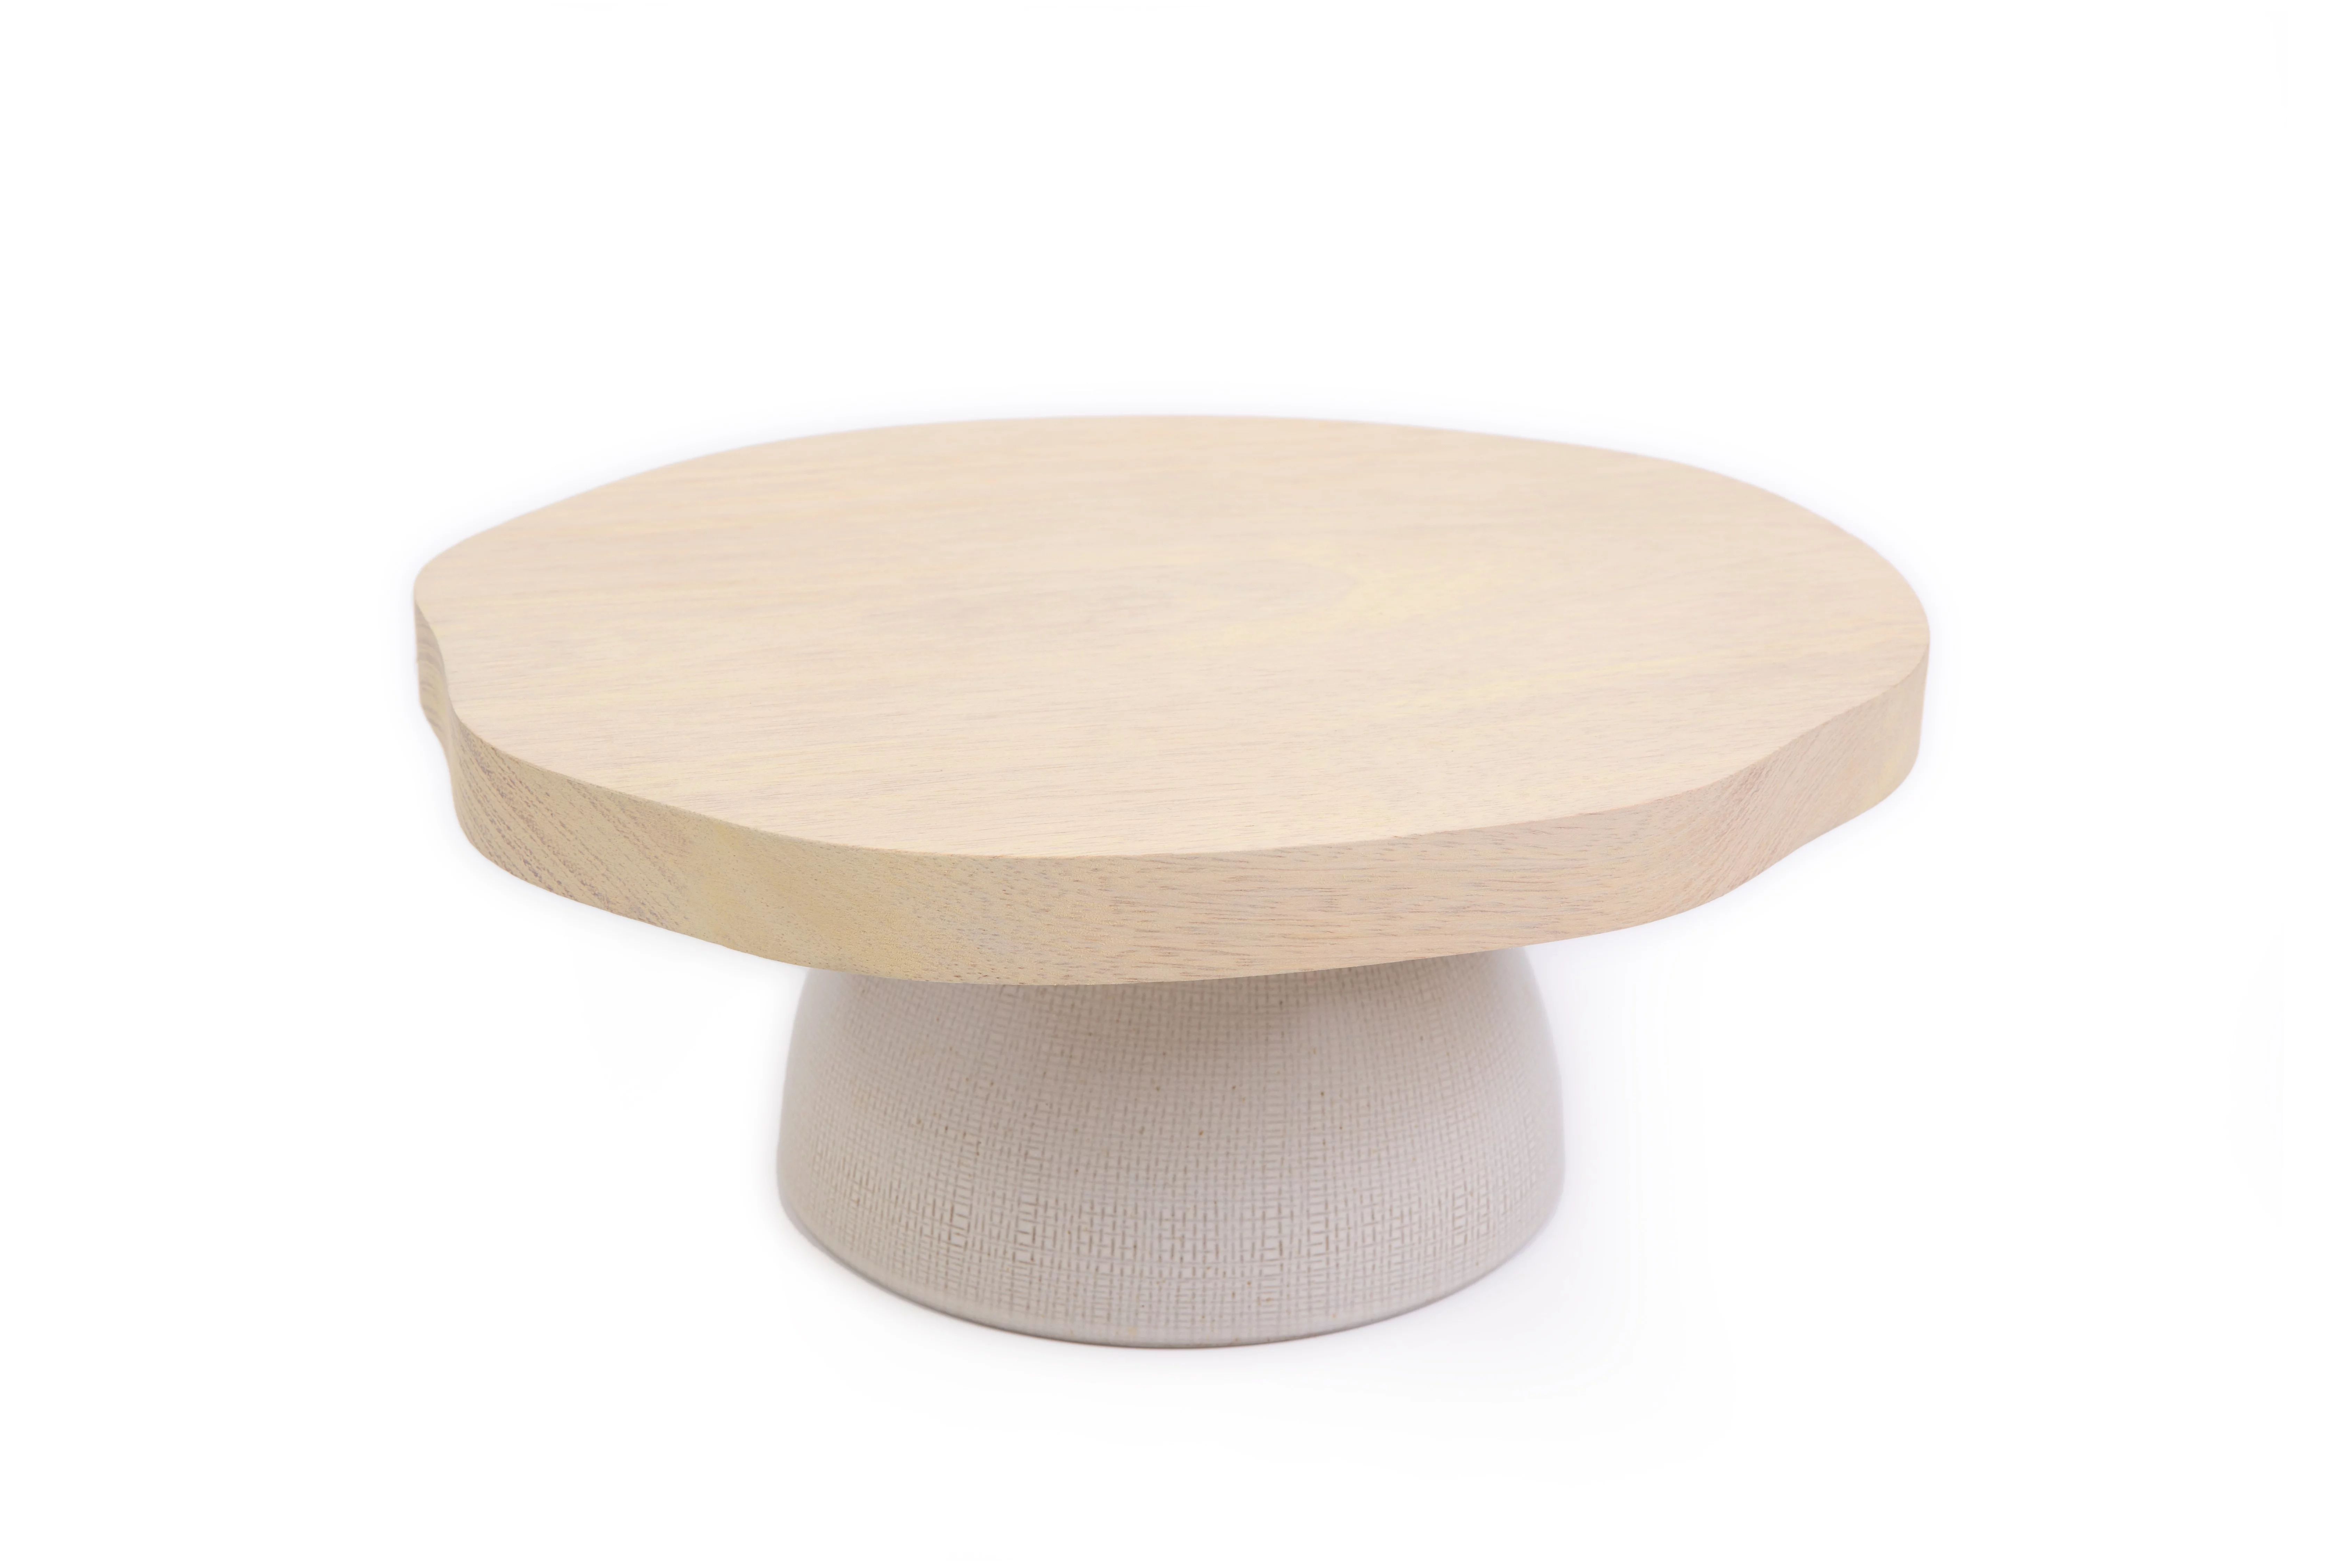 Better Homes & Gardens White Wash Mango Wood Cake Stand by Dave & Jenny Marrs | Walmart (US)